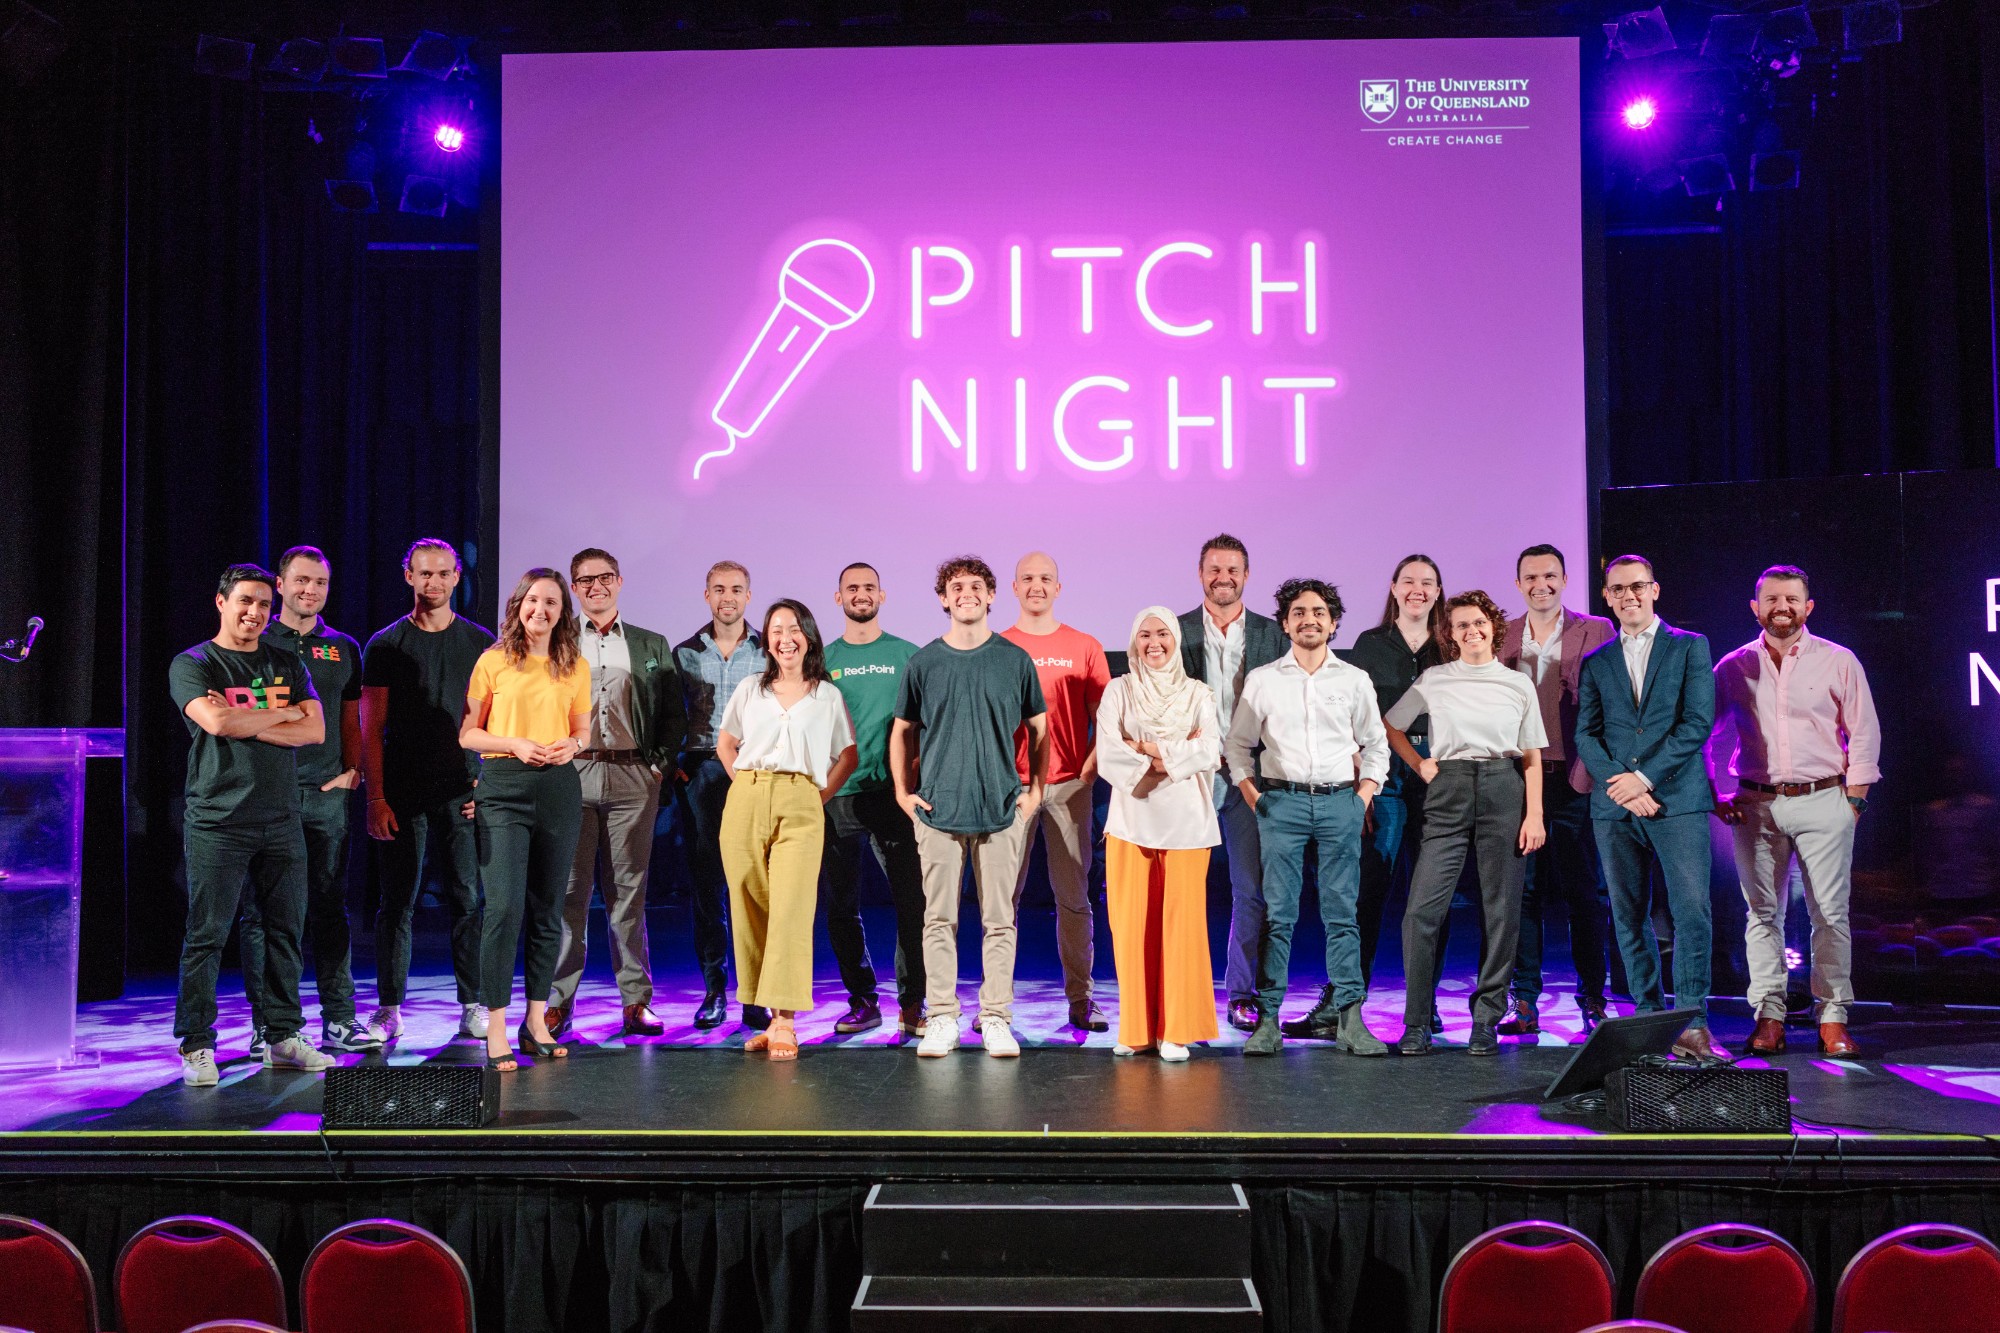 ilab cohort standing on stage at the Tivoli with 'Pitch Night' text on purple screen in the background